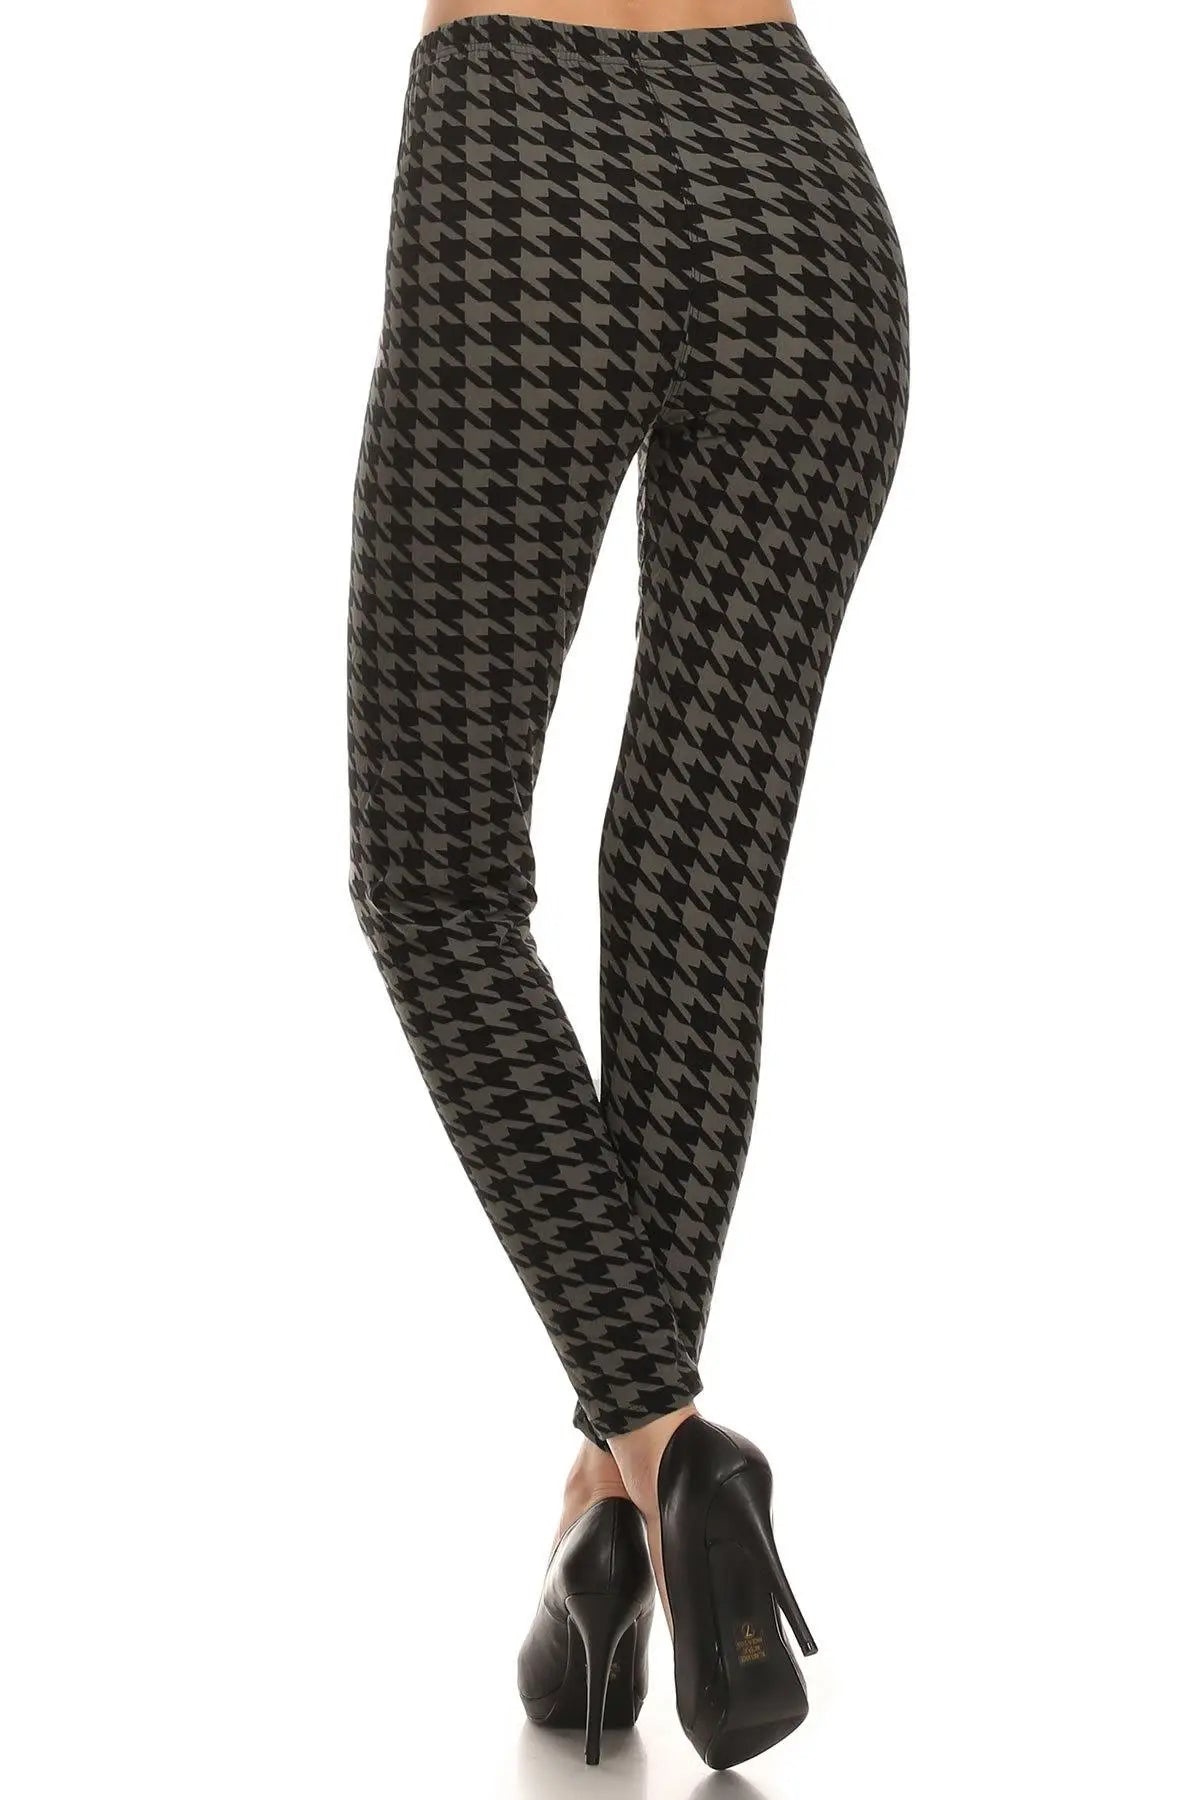 High Waisted Hound Tooth Printed Knit Legging With Elastic Waistband Sunny EvE Fashion